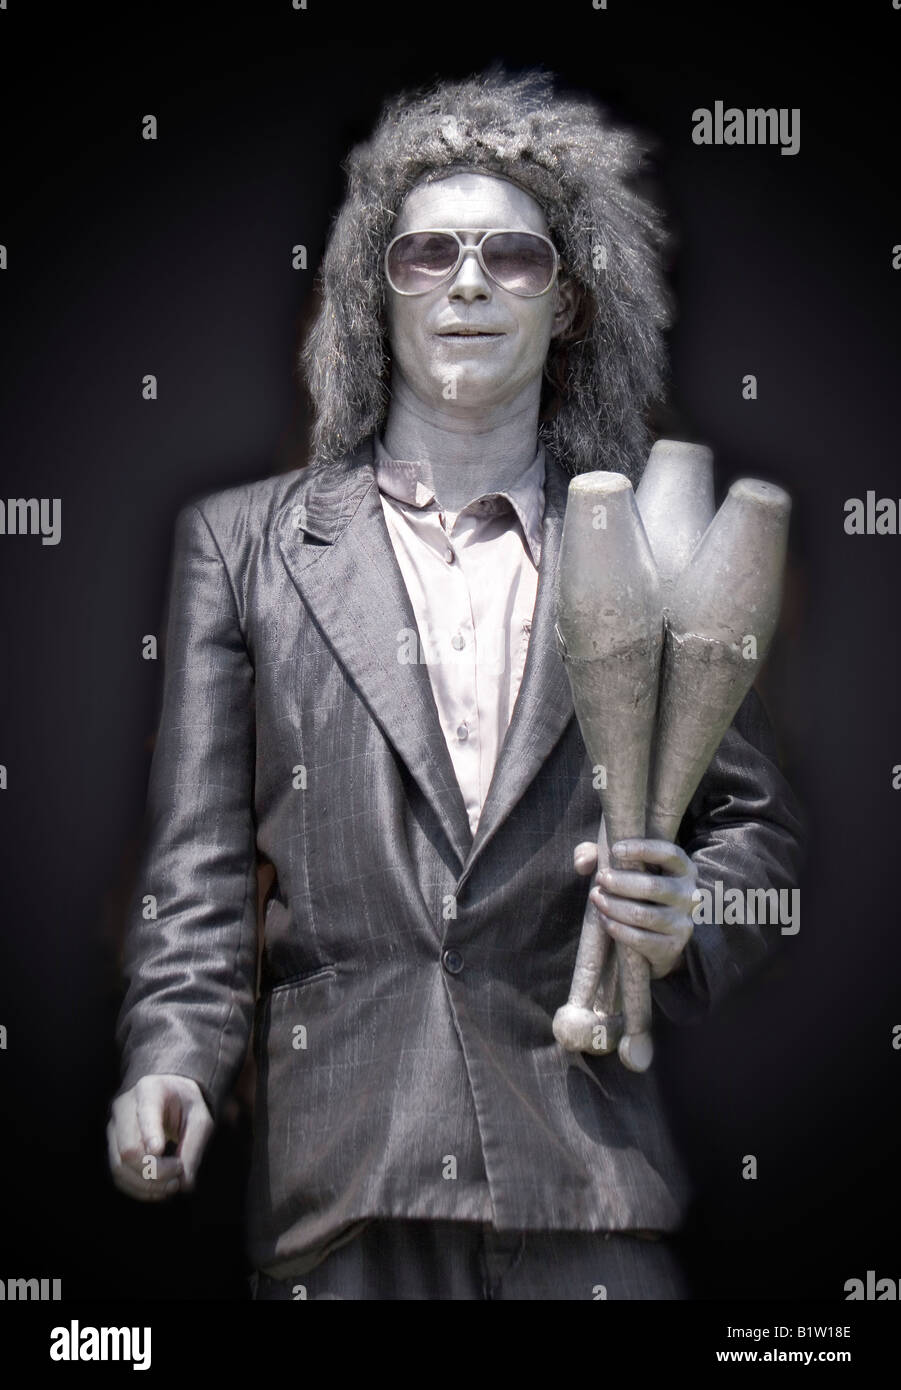 A street performer poses with his juggling clubs, dressed in silver clothing, wig and makeup. Stock Photo